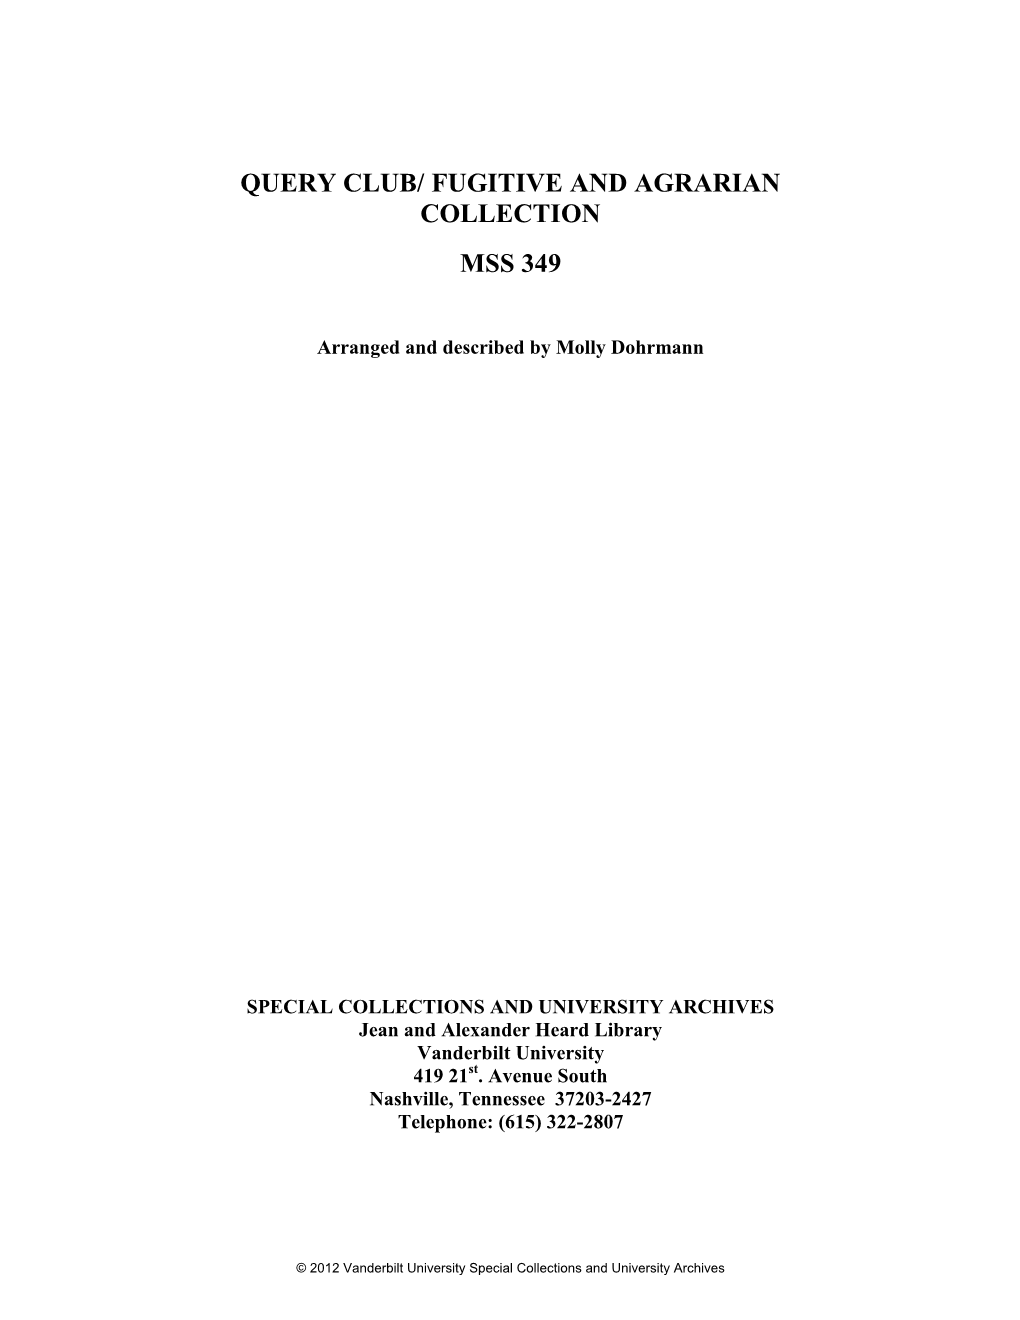 Query Club/Fugitive and Agrarian Collection